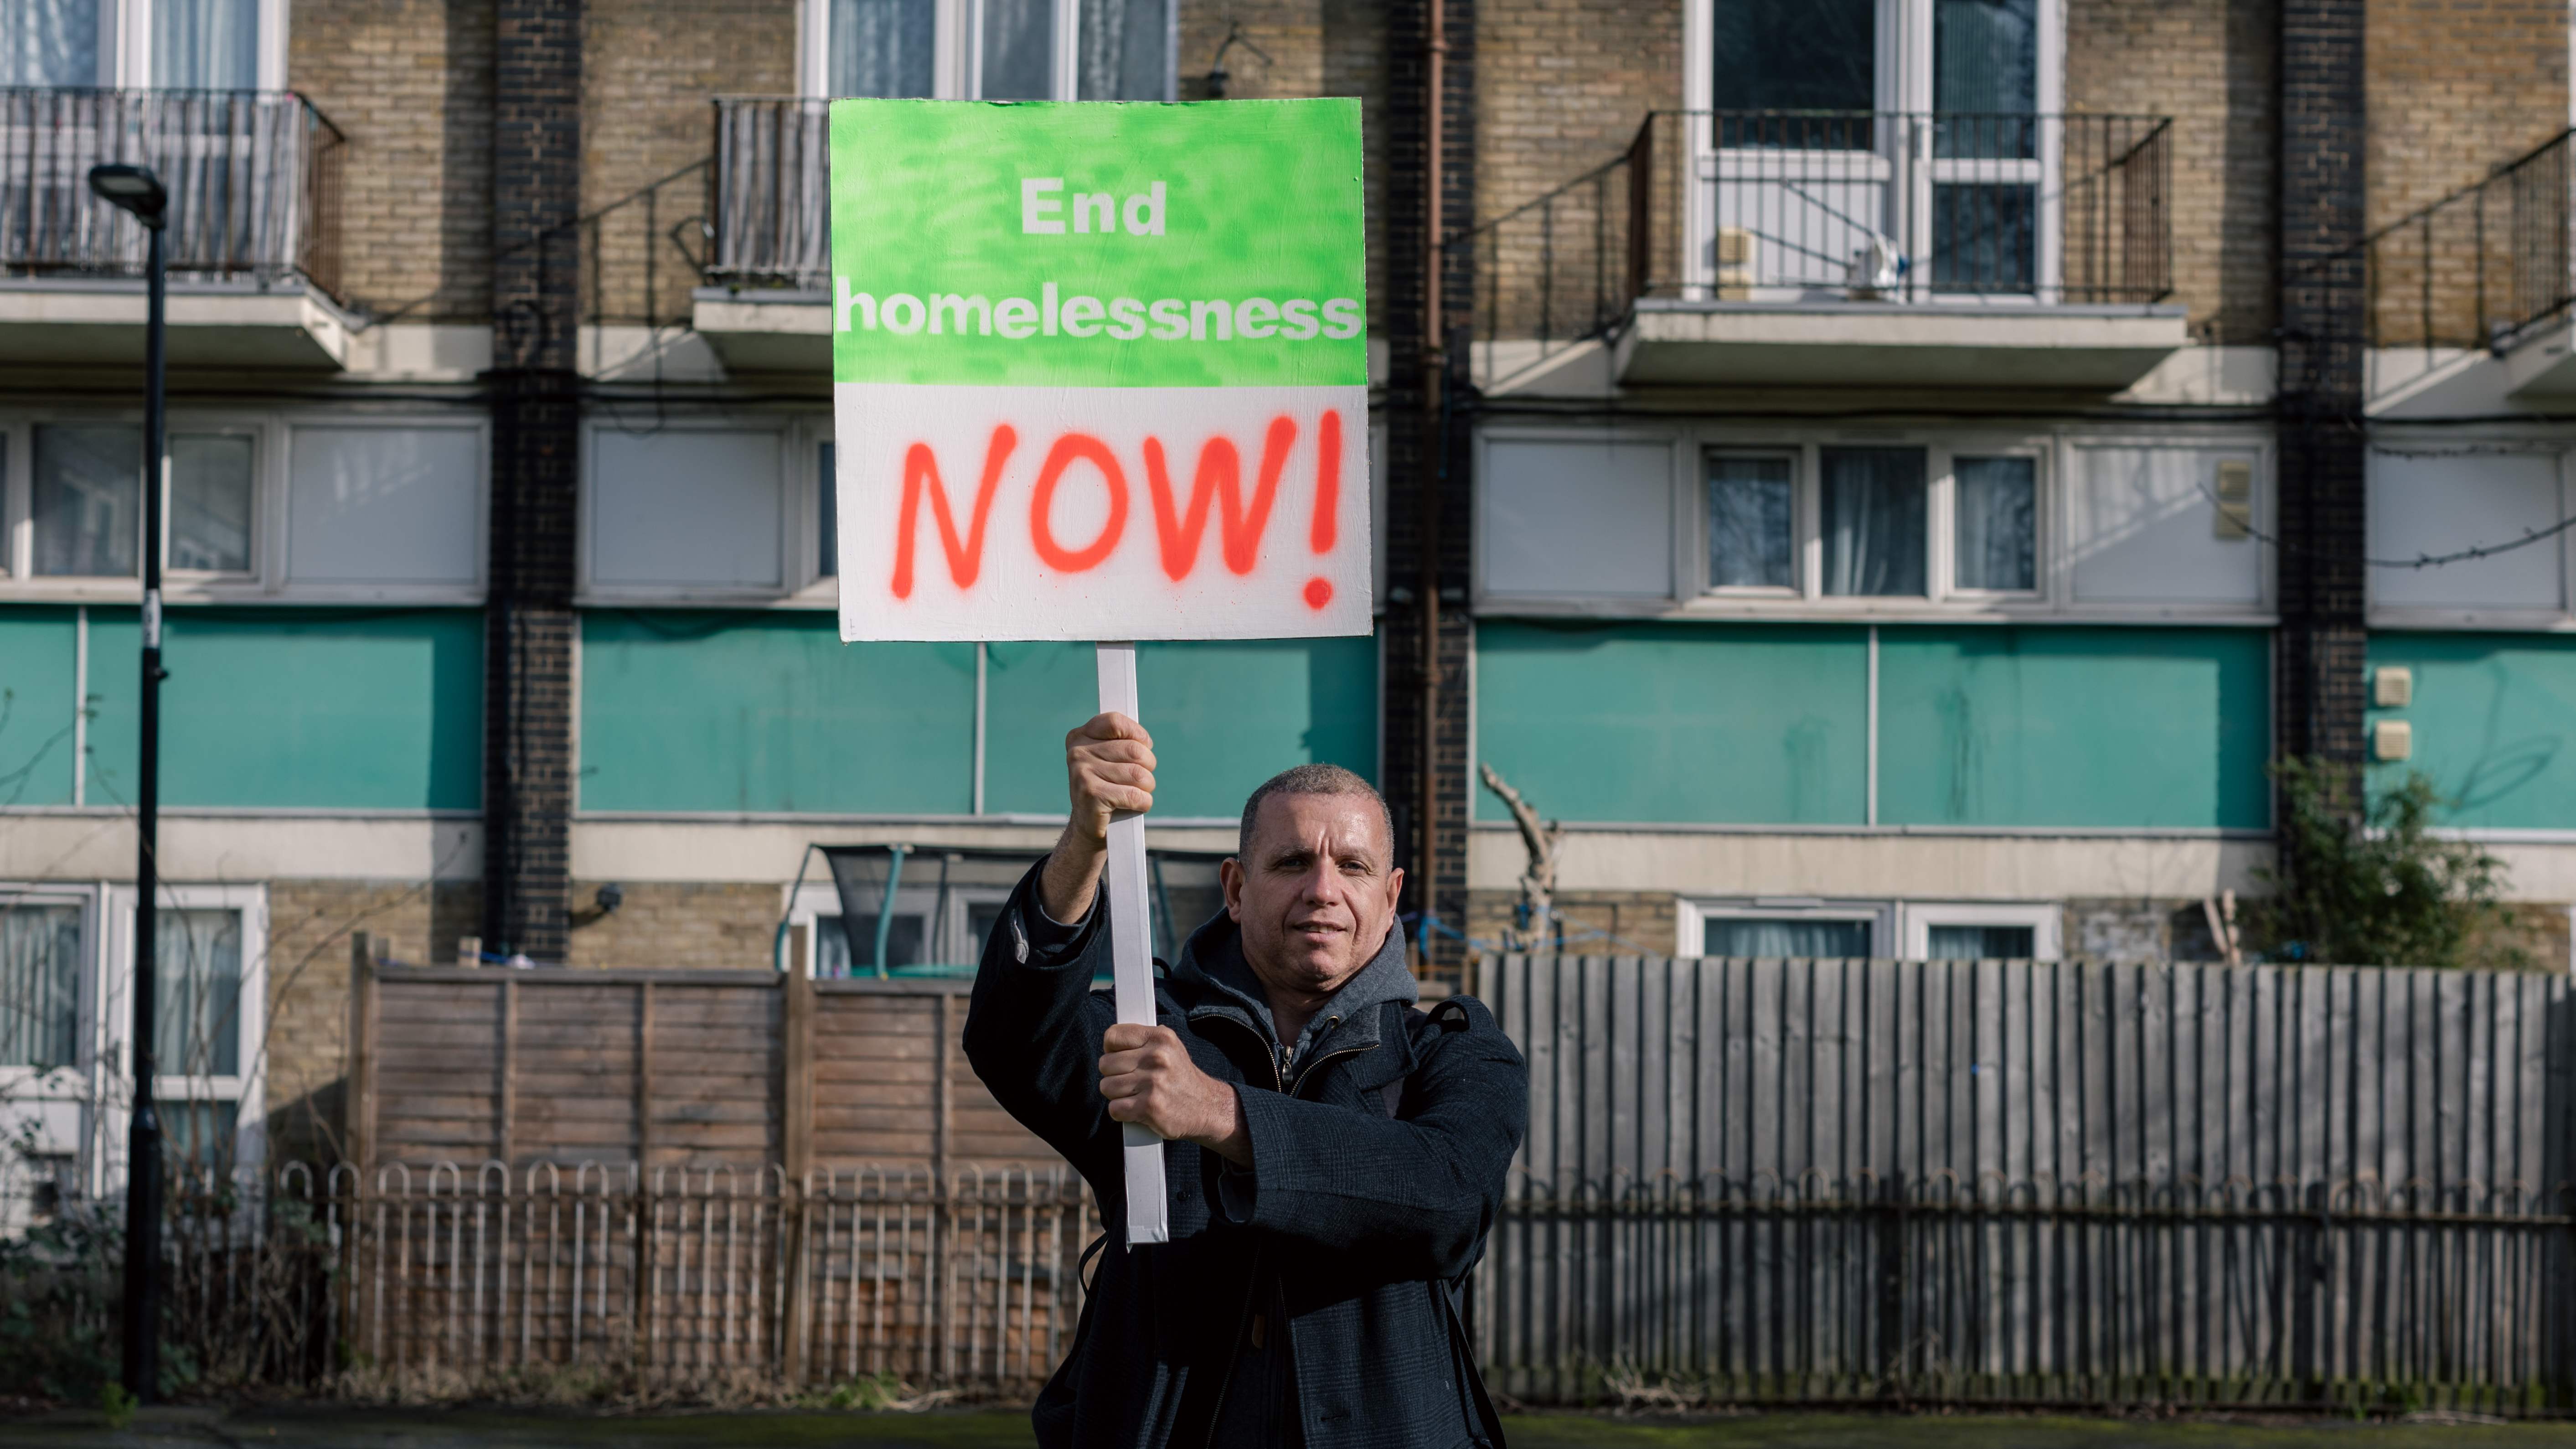 A hispanic man holding a placard that says 'end homelessness now!'